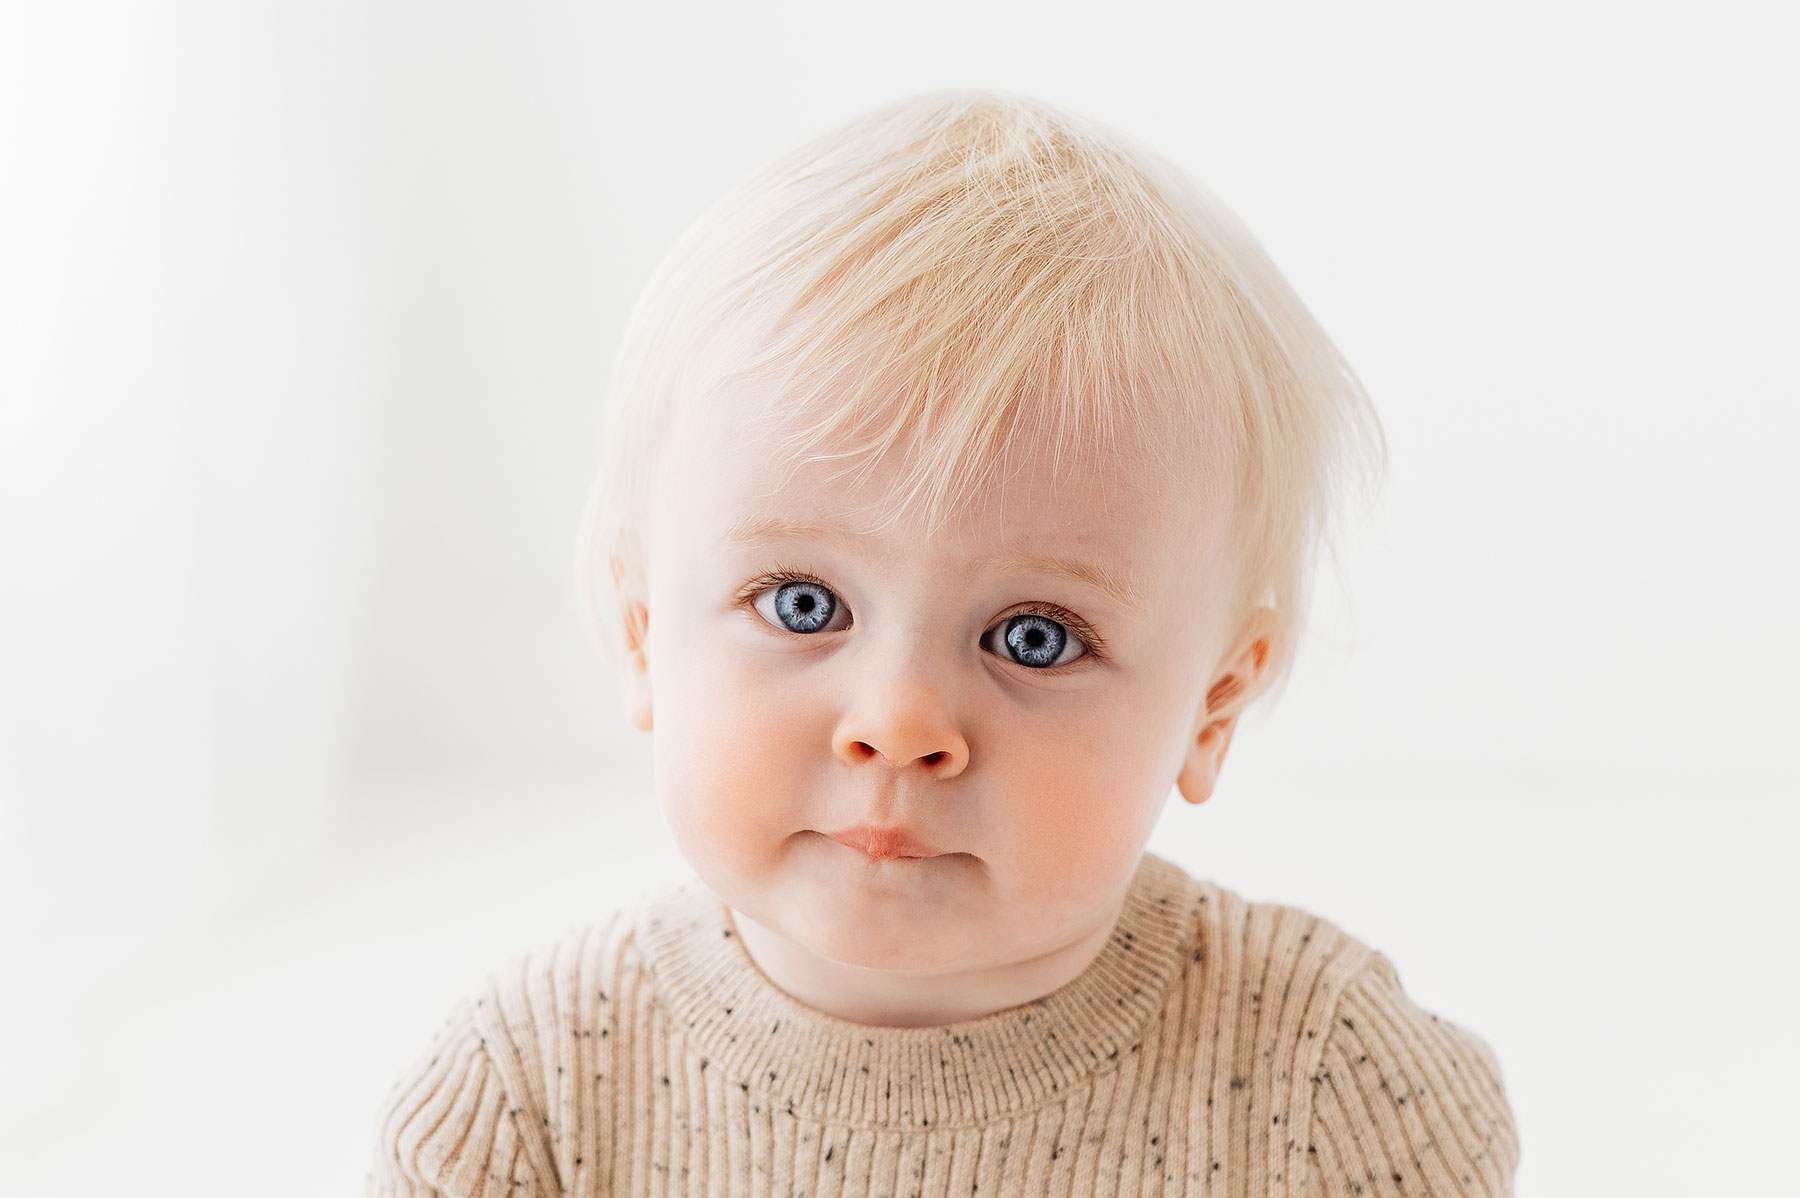 Baby girl wearing beige romper, looking directly at the camera